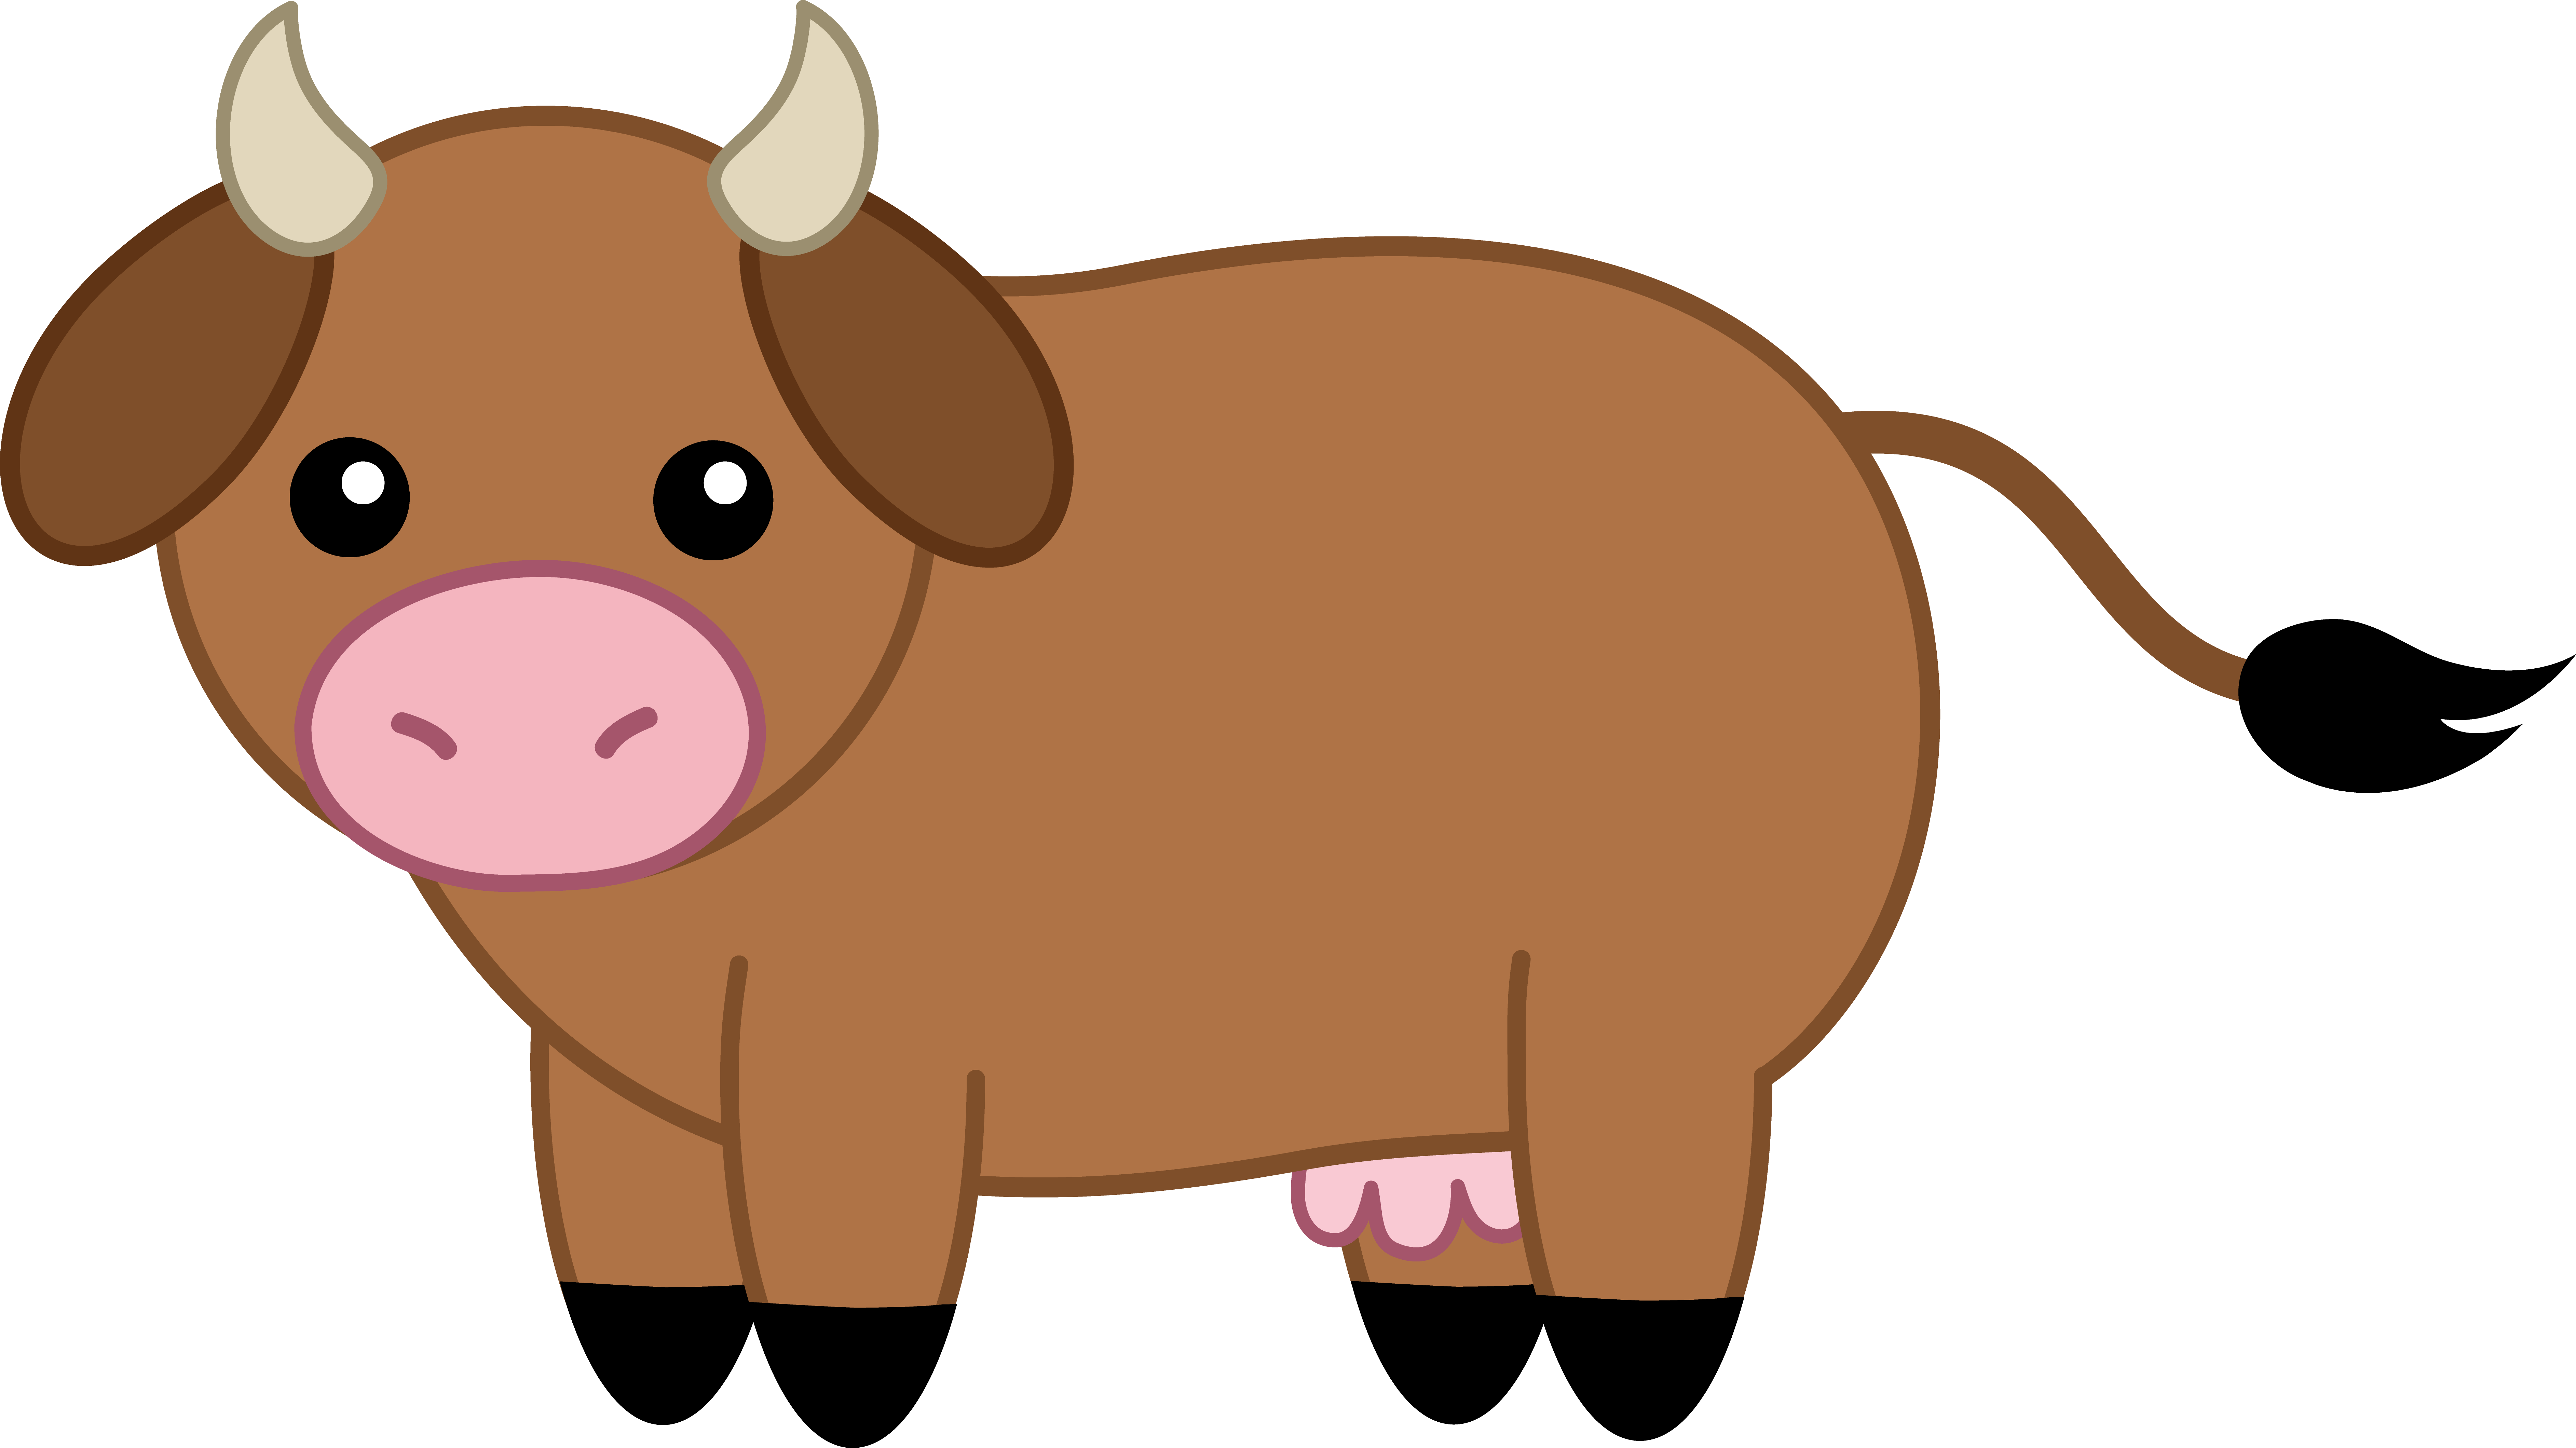 Halo clipart animated. Little brown cow panda